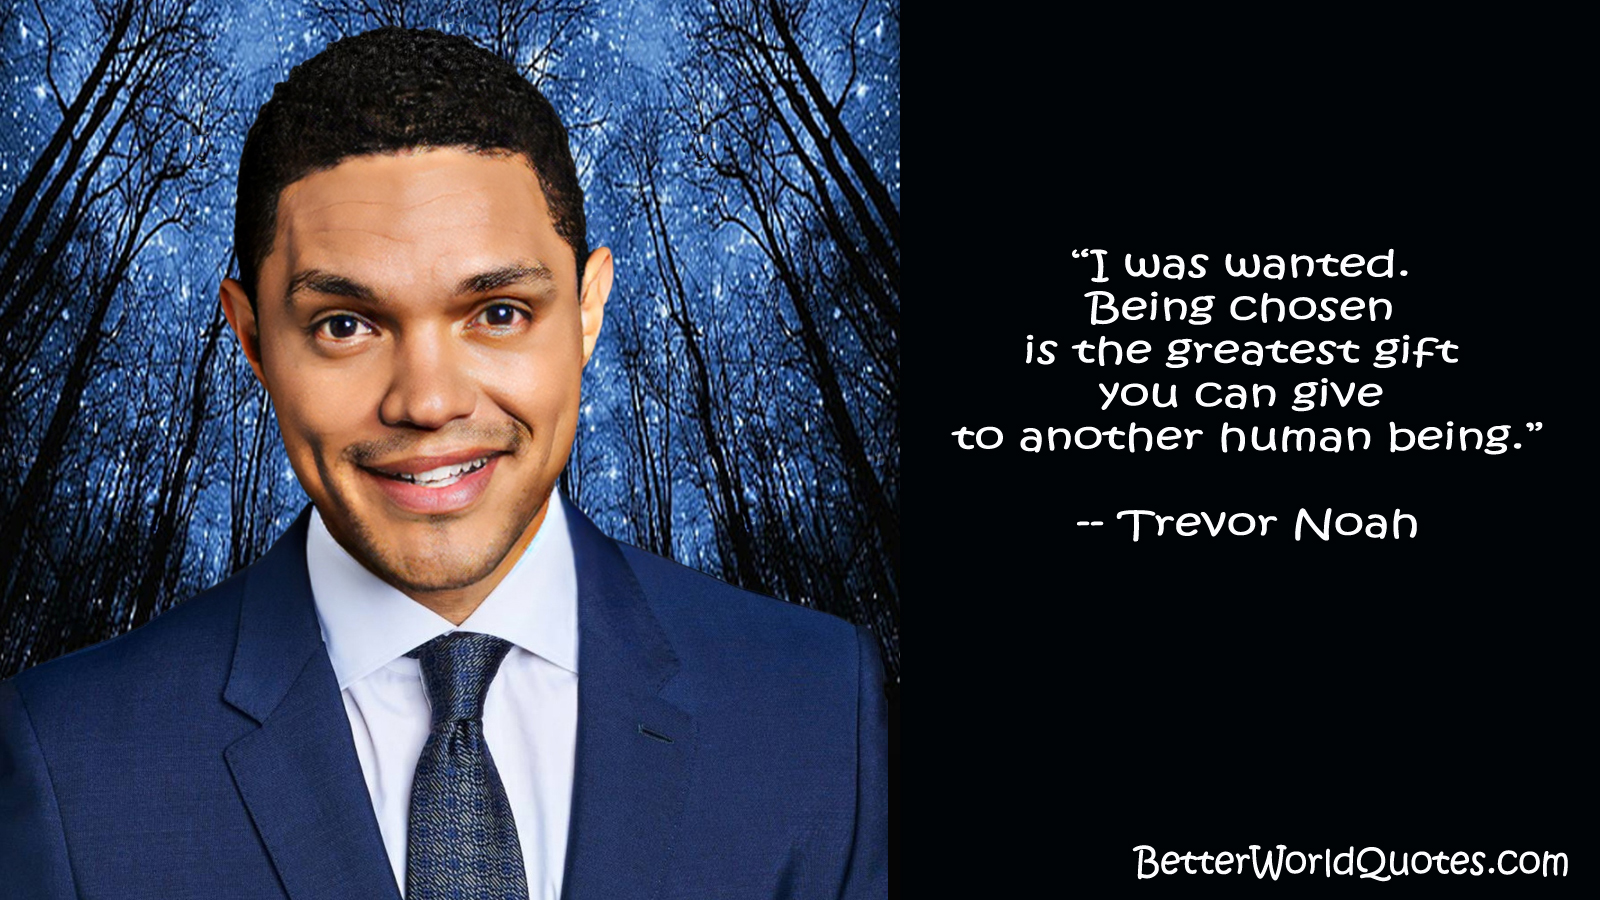 Trevor Noah: But regret is the thing we should fear most. Failure is an answer. Rejection is an answer. Regret is an eternal question you will never have the answer to.